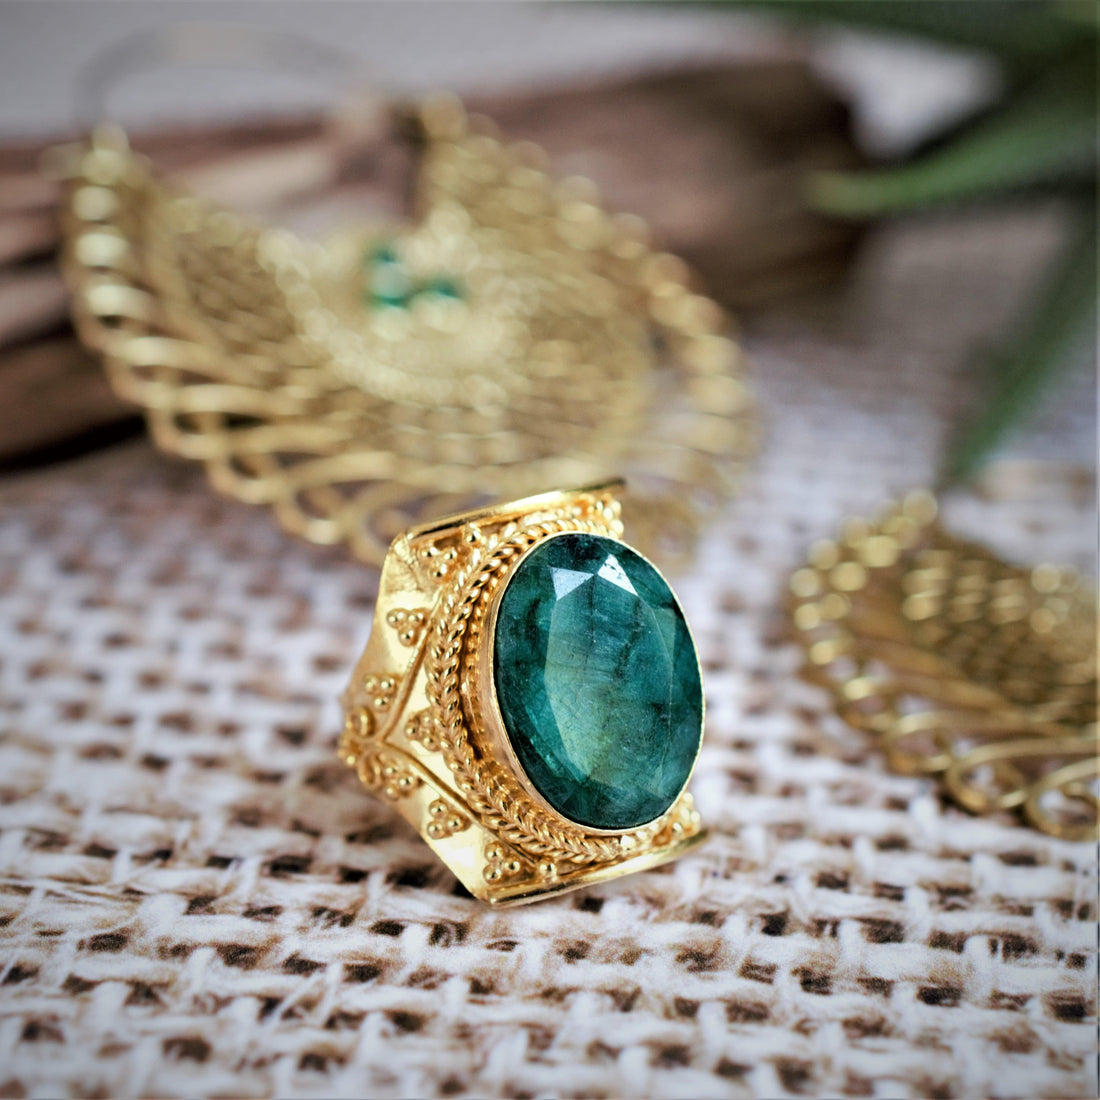 Muse Emerald Ring